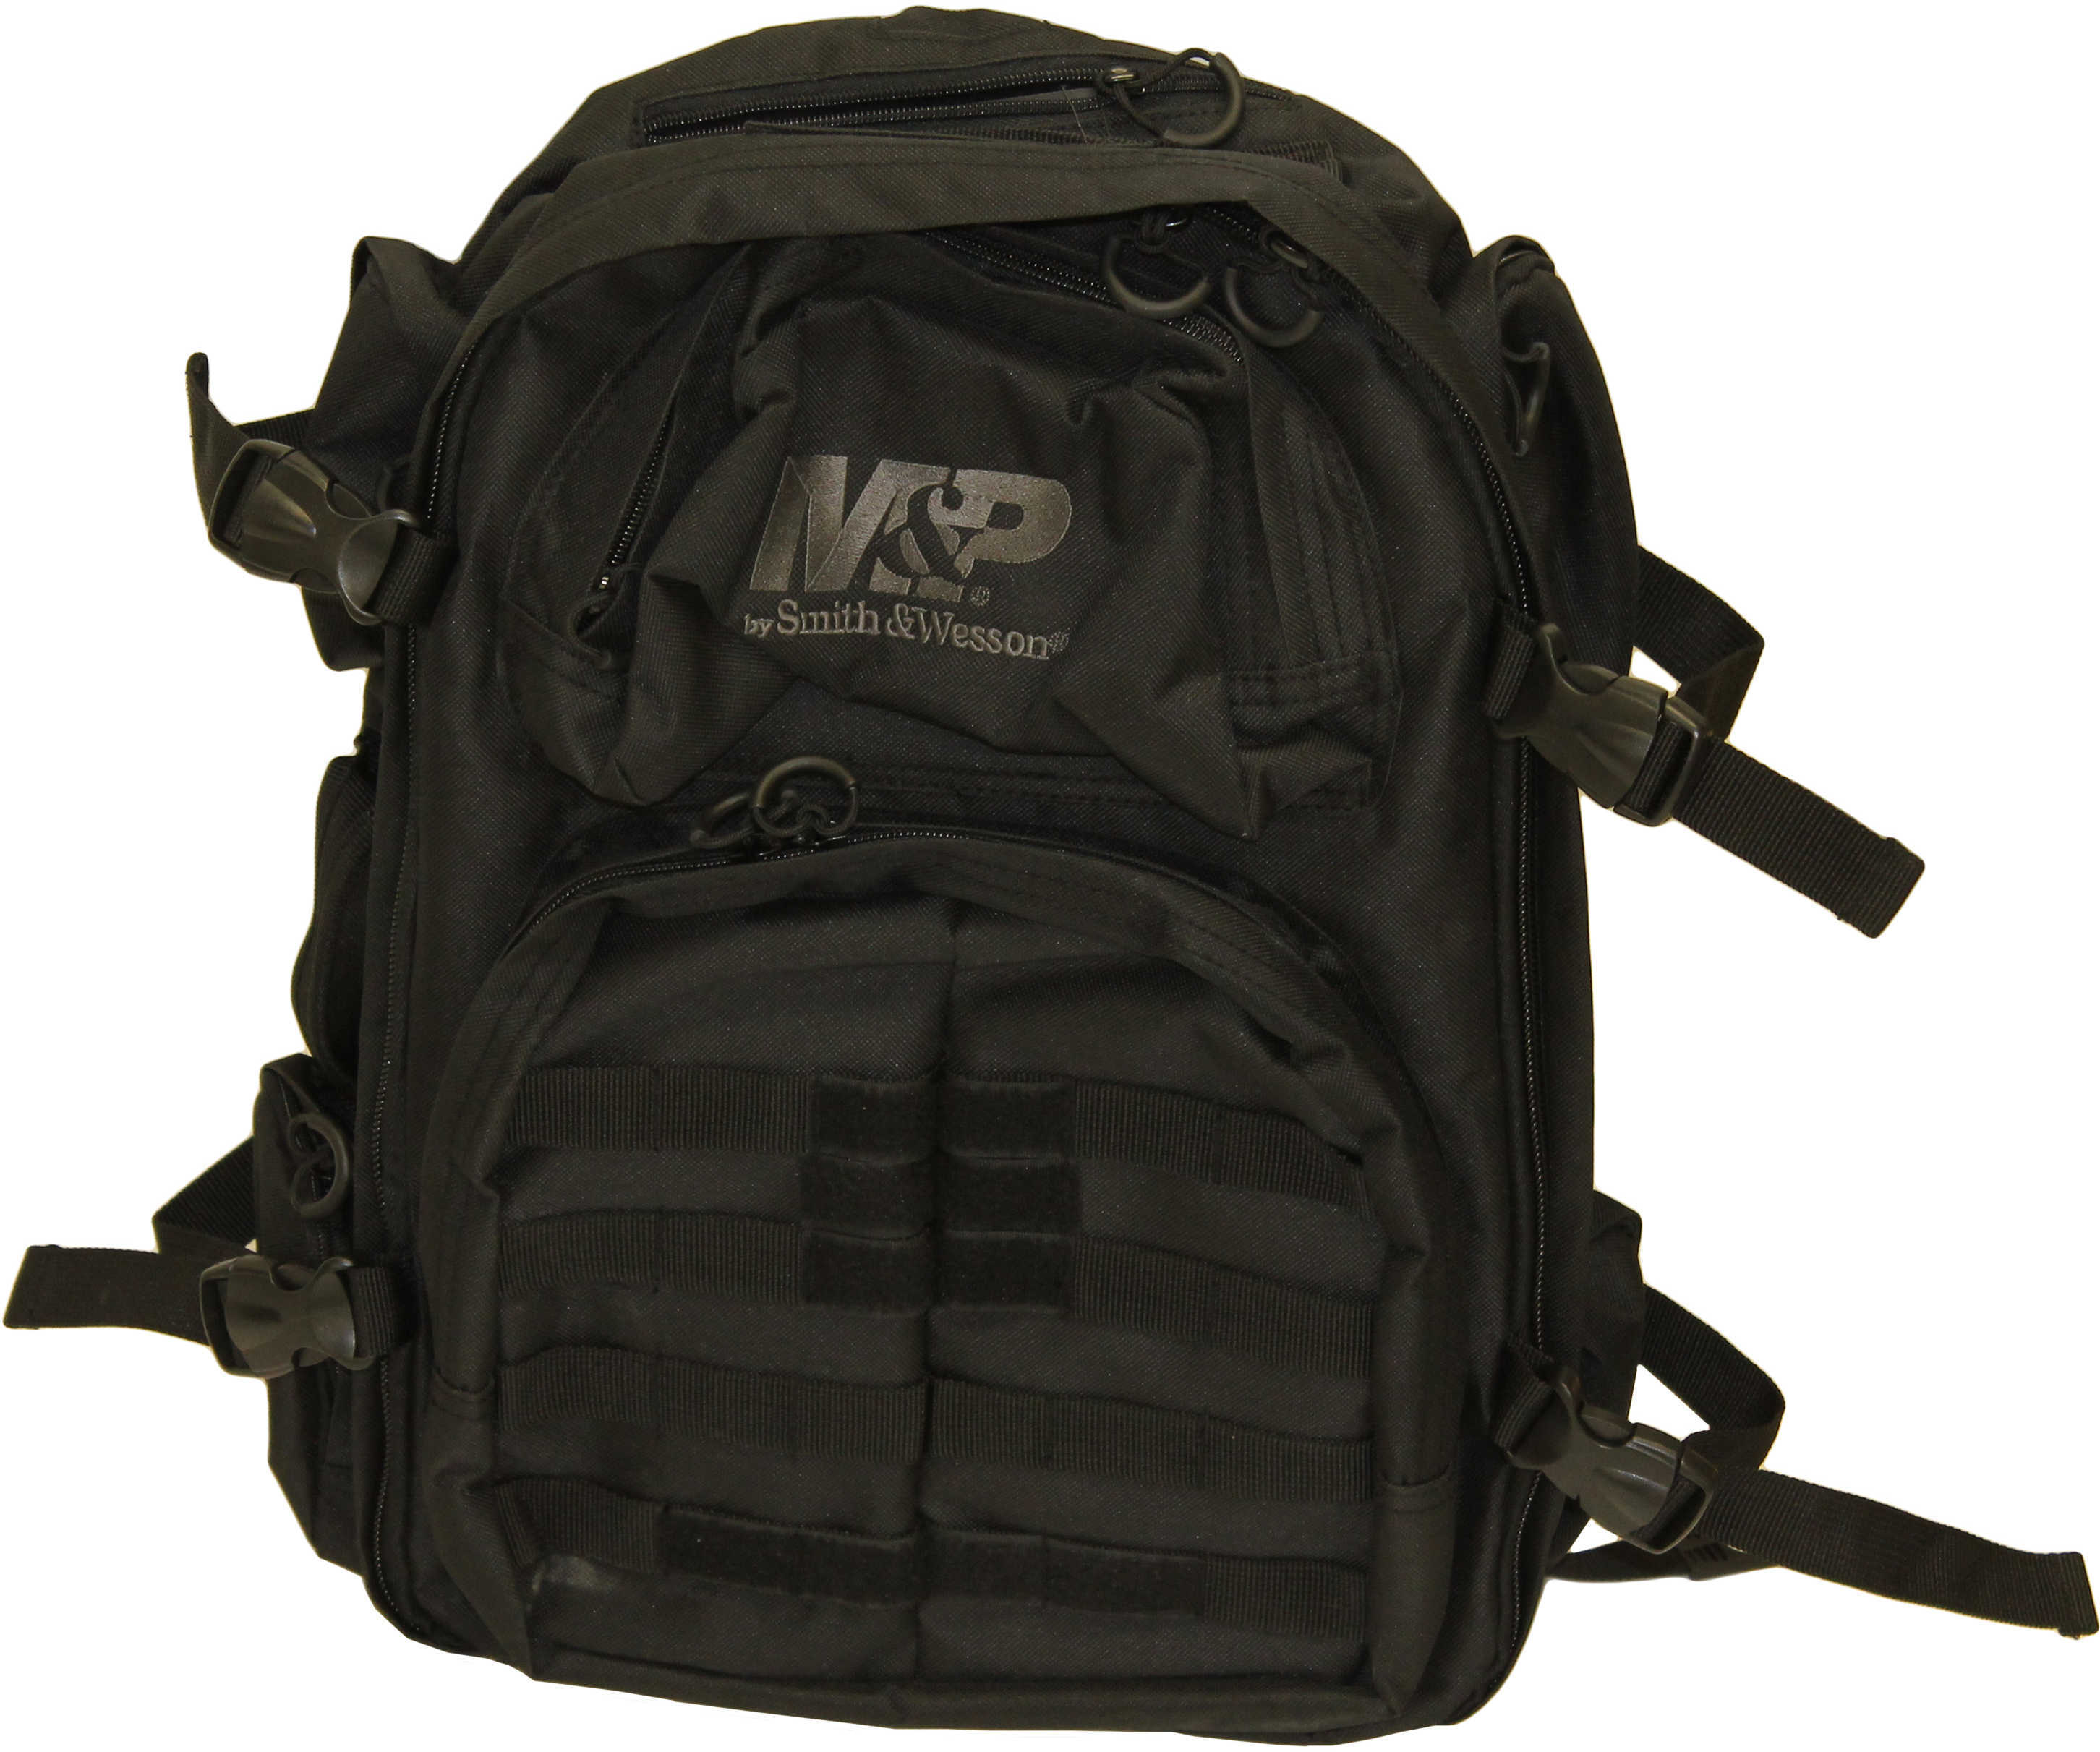 Accessories Pro Tac Backpack. Black Md: 110027